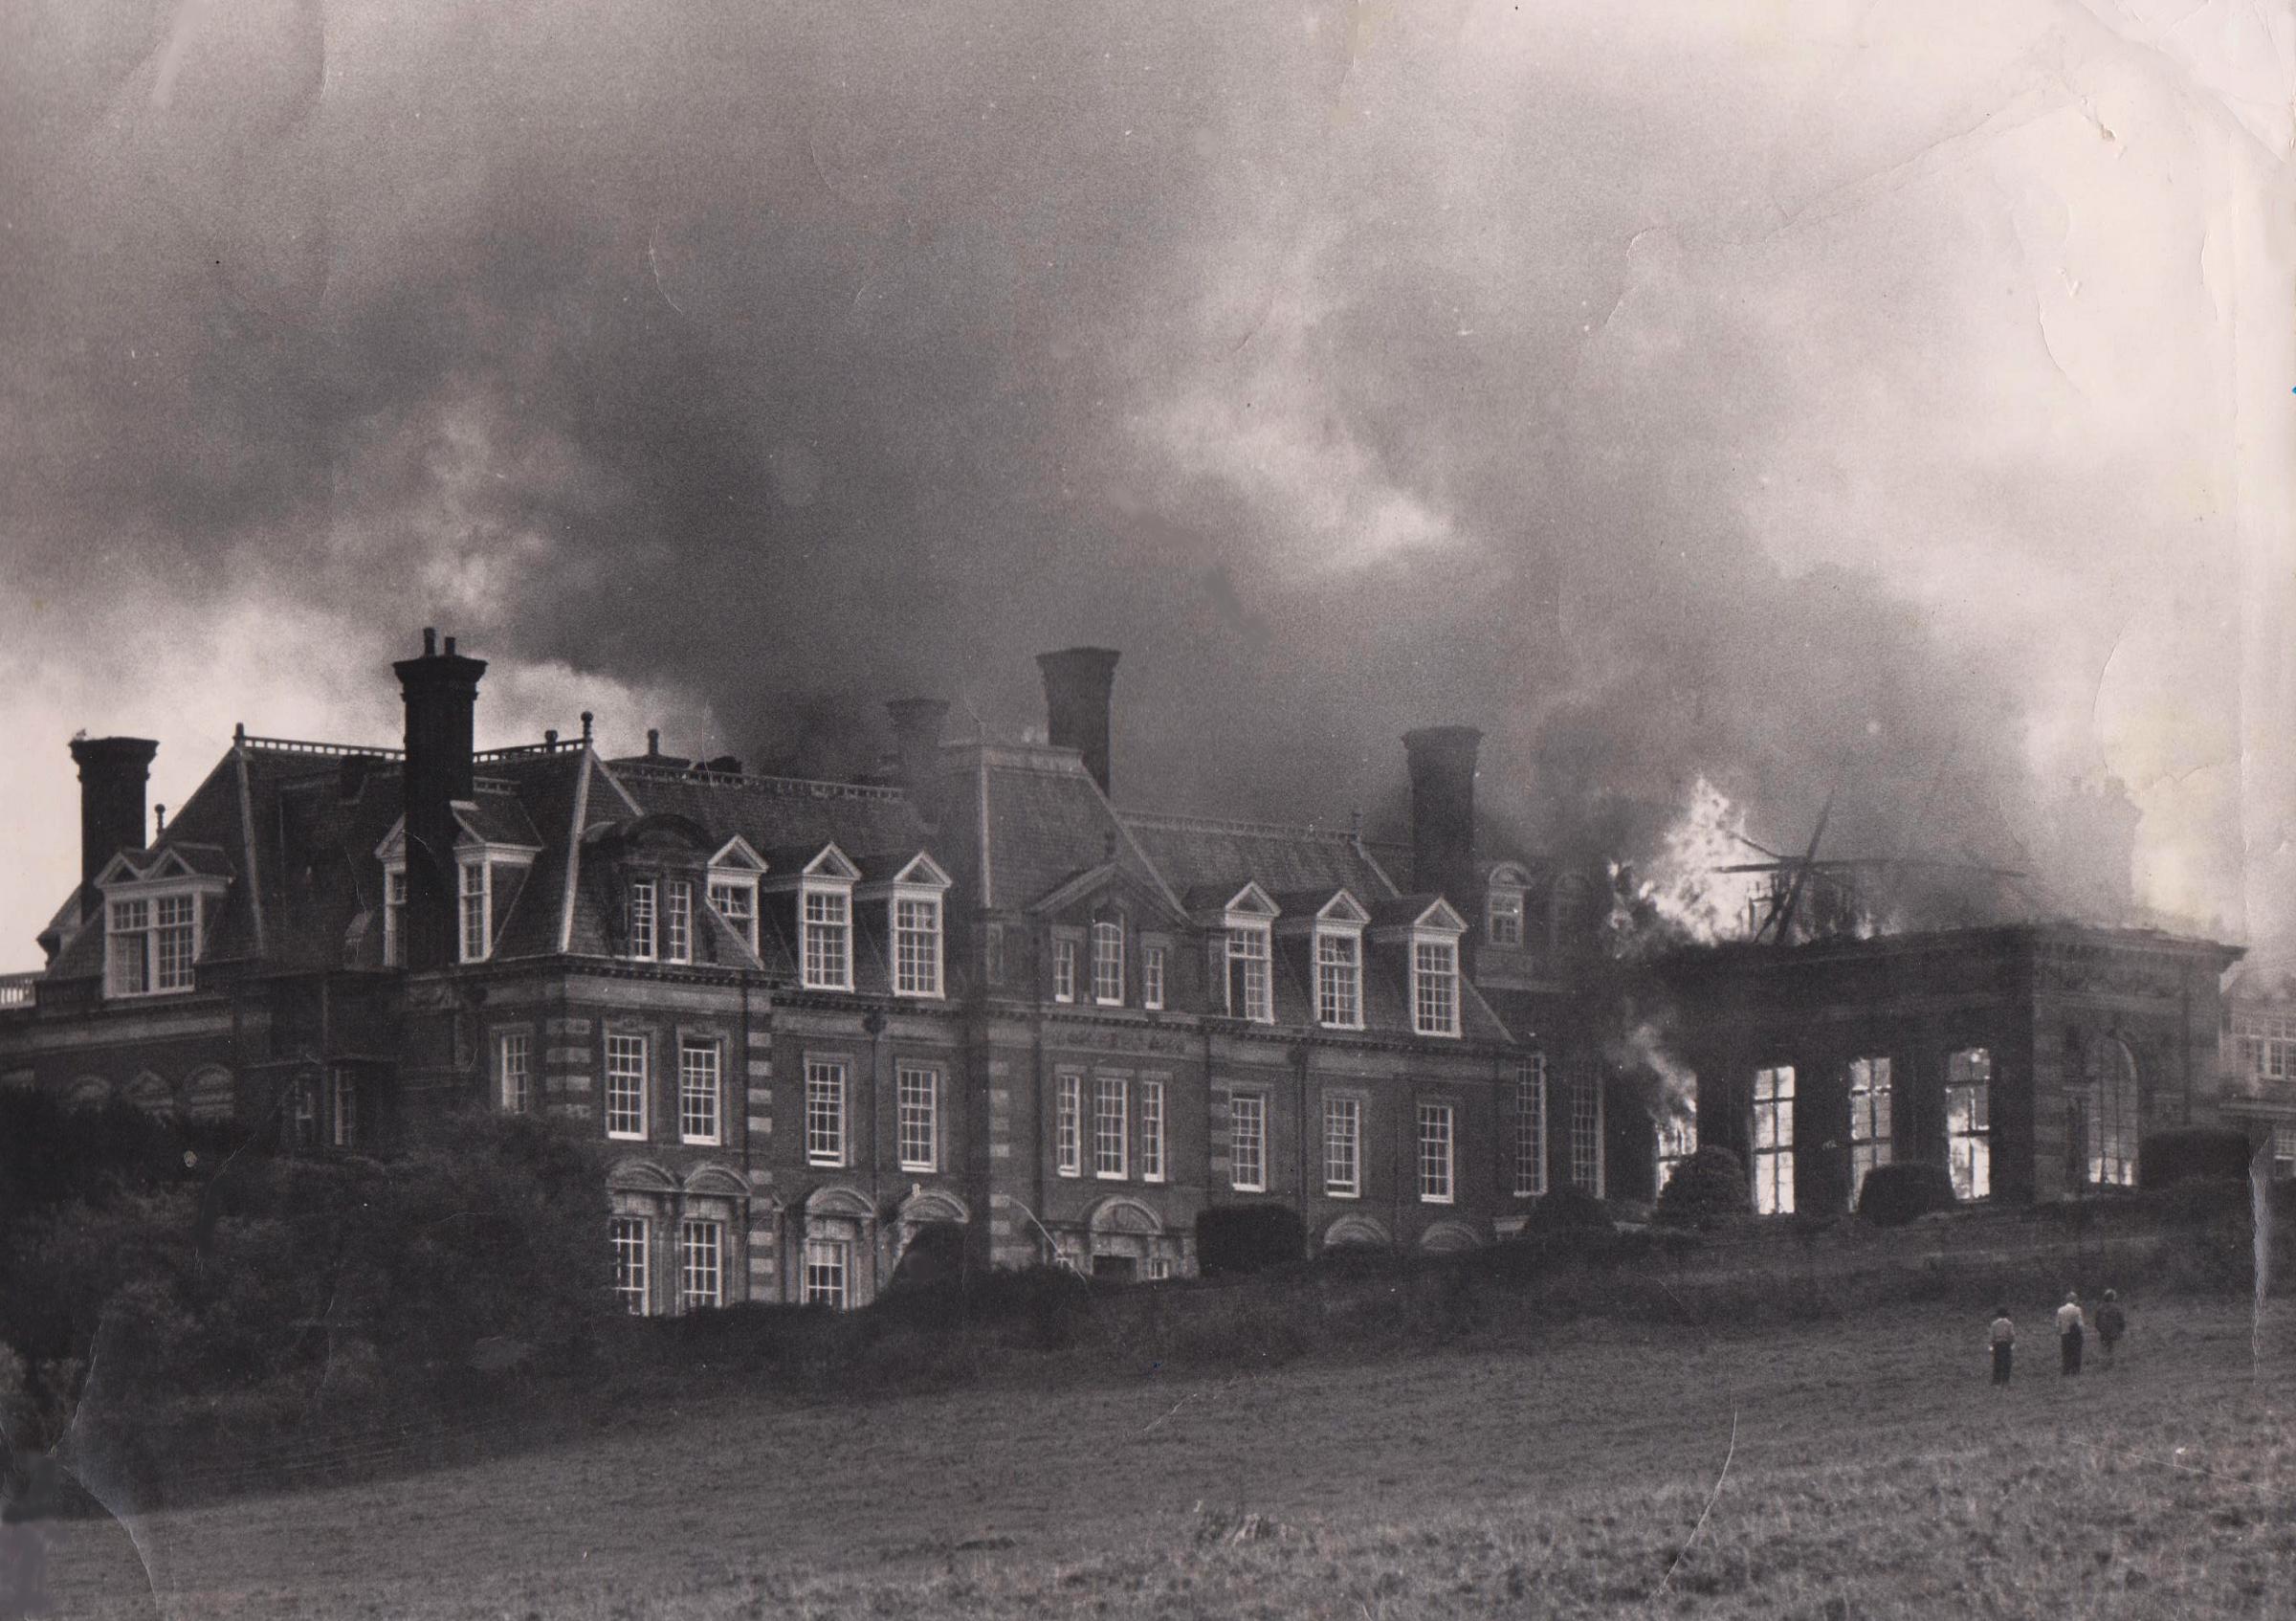 Photographer Phil Micheu took this photograph of Kinmel Hall (Clarendon Girls School) during the hight of the blaze in 1975. The fire gutted the West wing and main hall of the building.